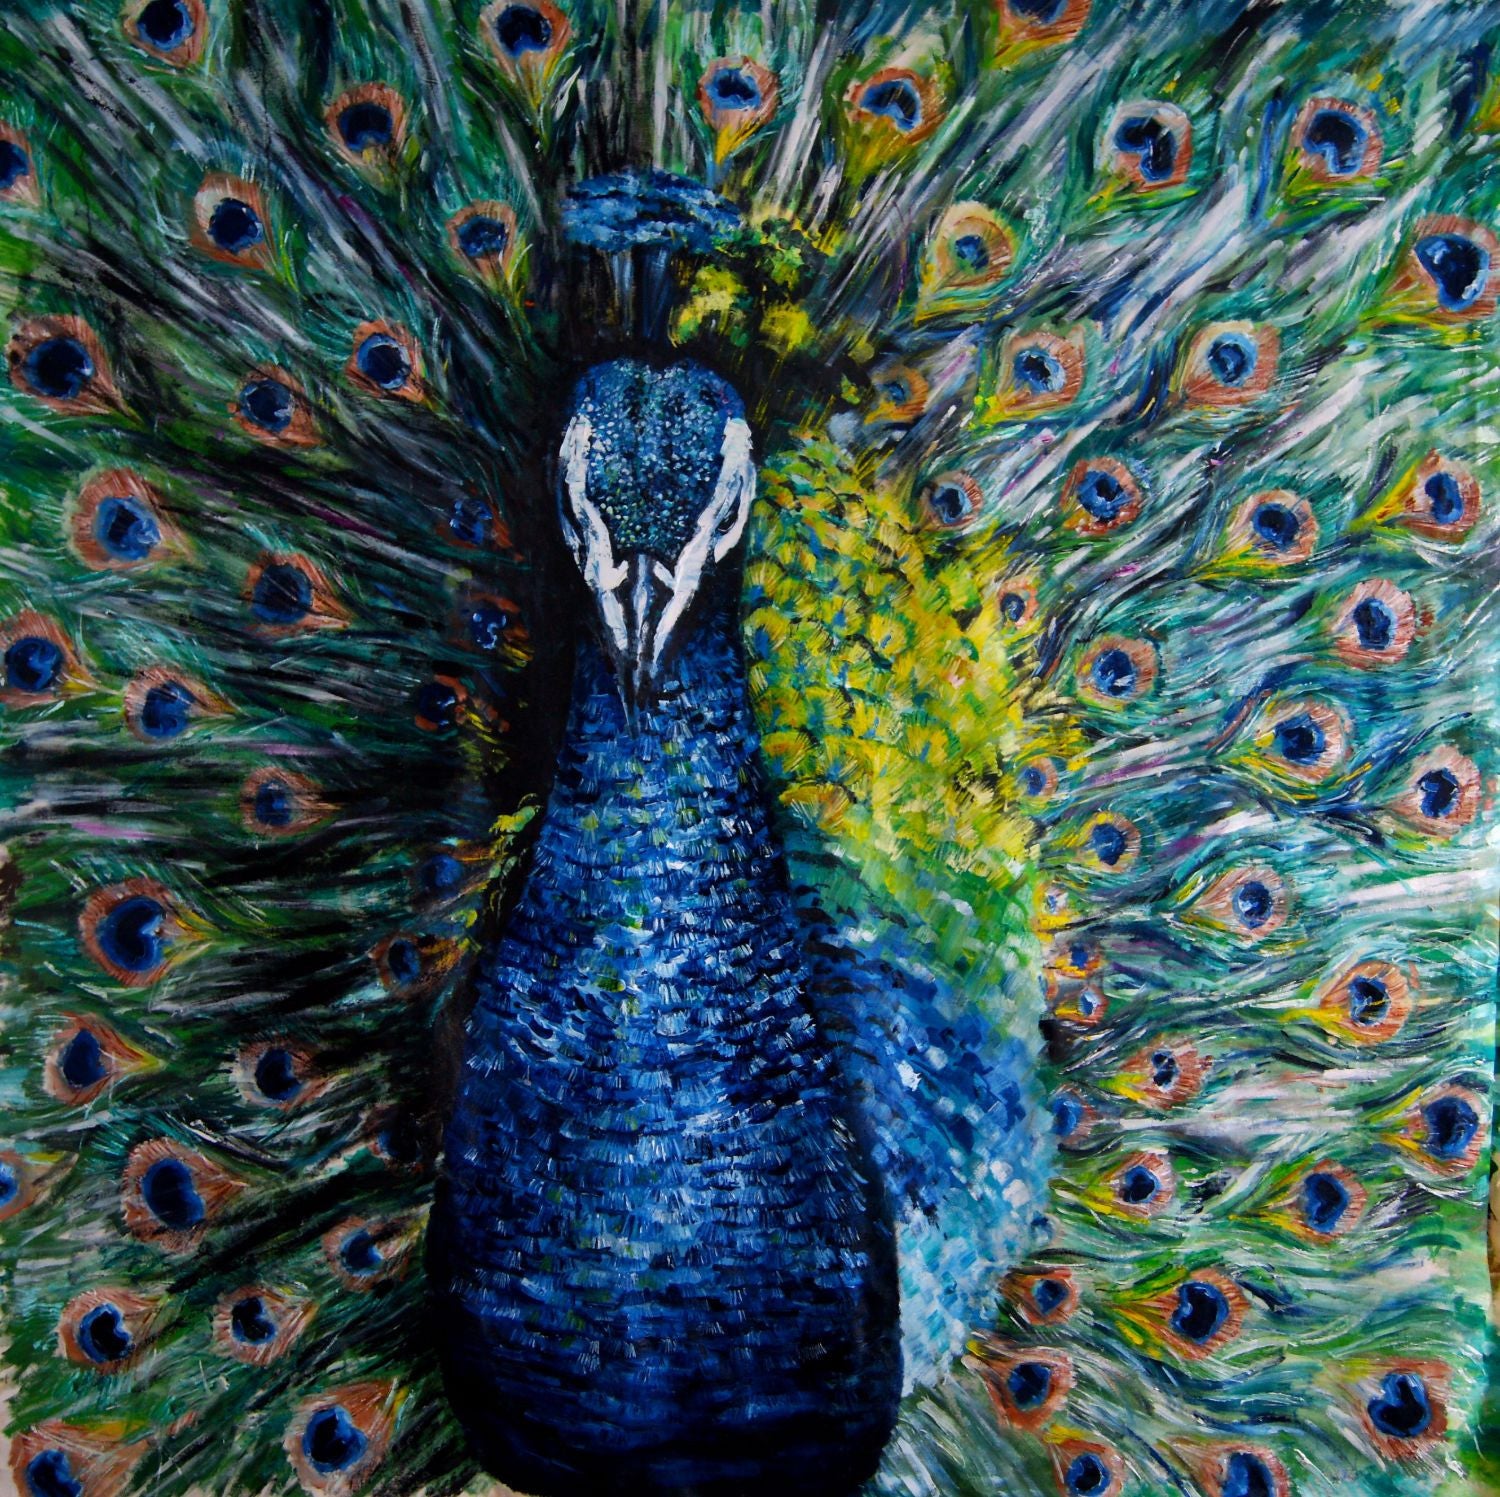 Peacock by Chris Lord Photo Peacock Photo Peacock Decor Wall Art Decor Peacock Wall Art Bird Prints Bird Pictures Wall Decor Feather Prints Wall Art B